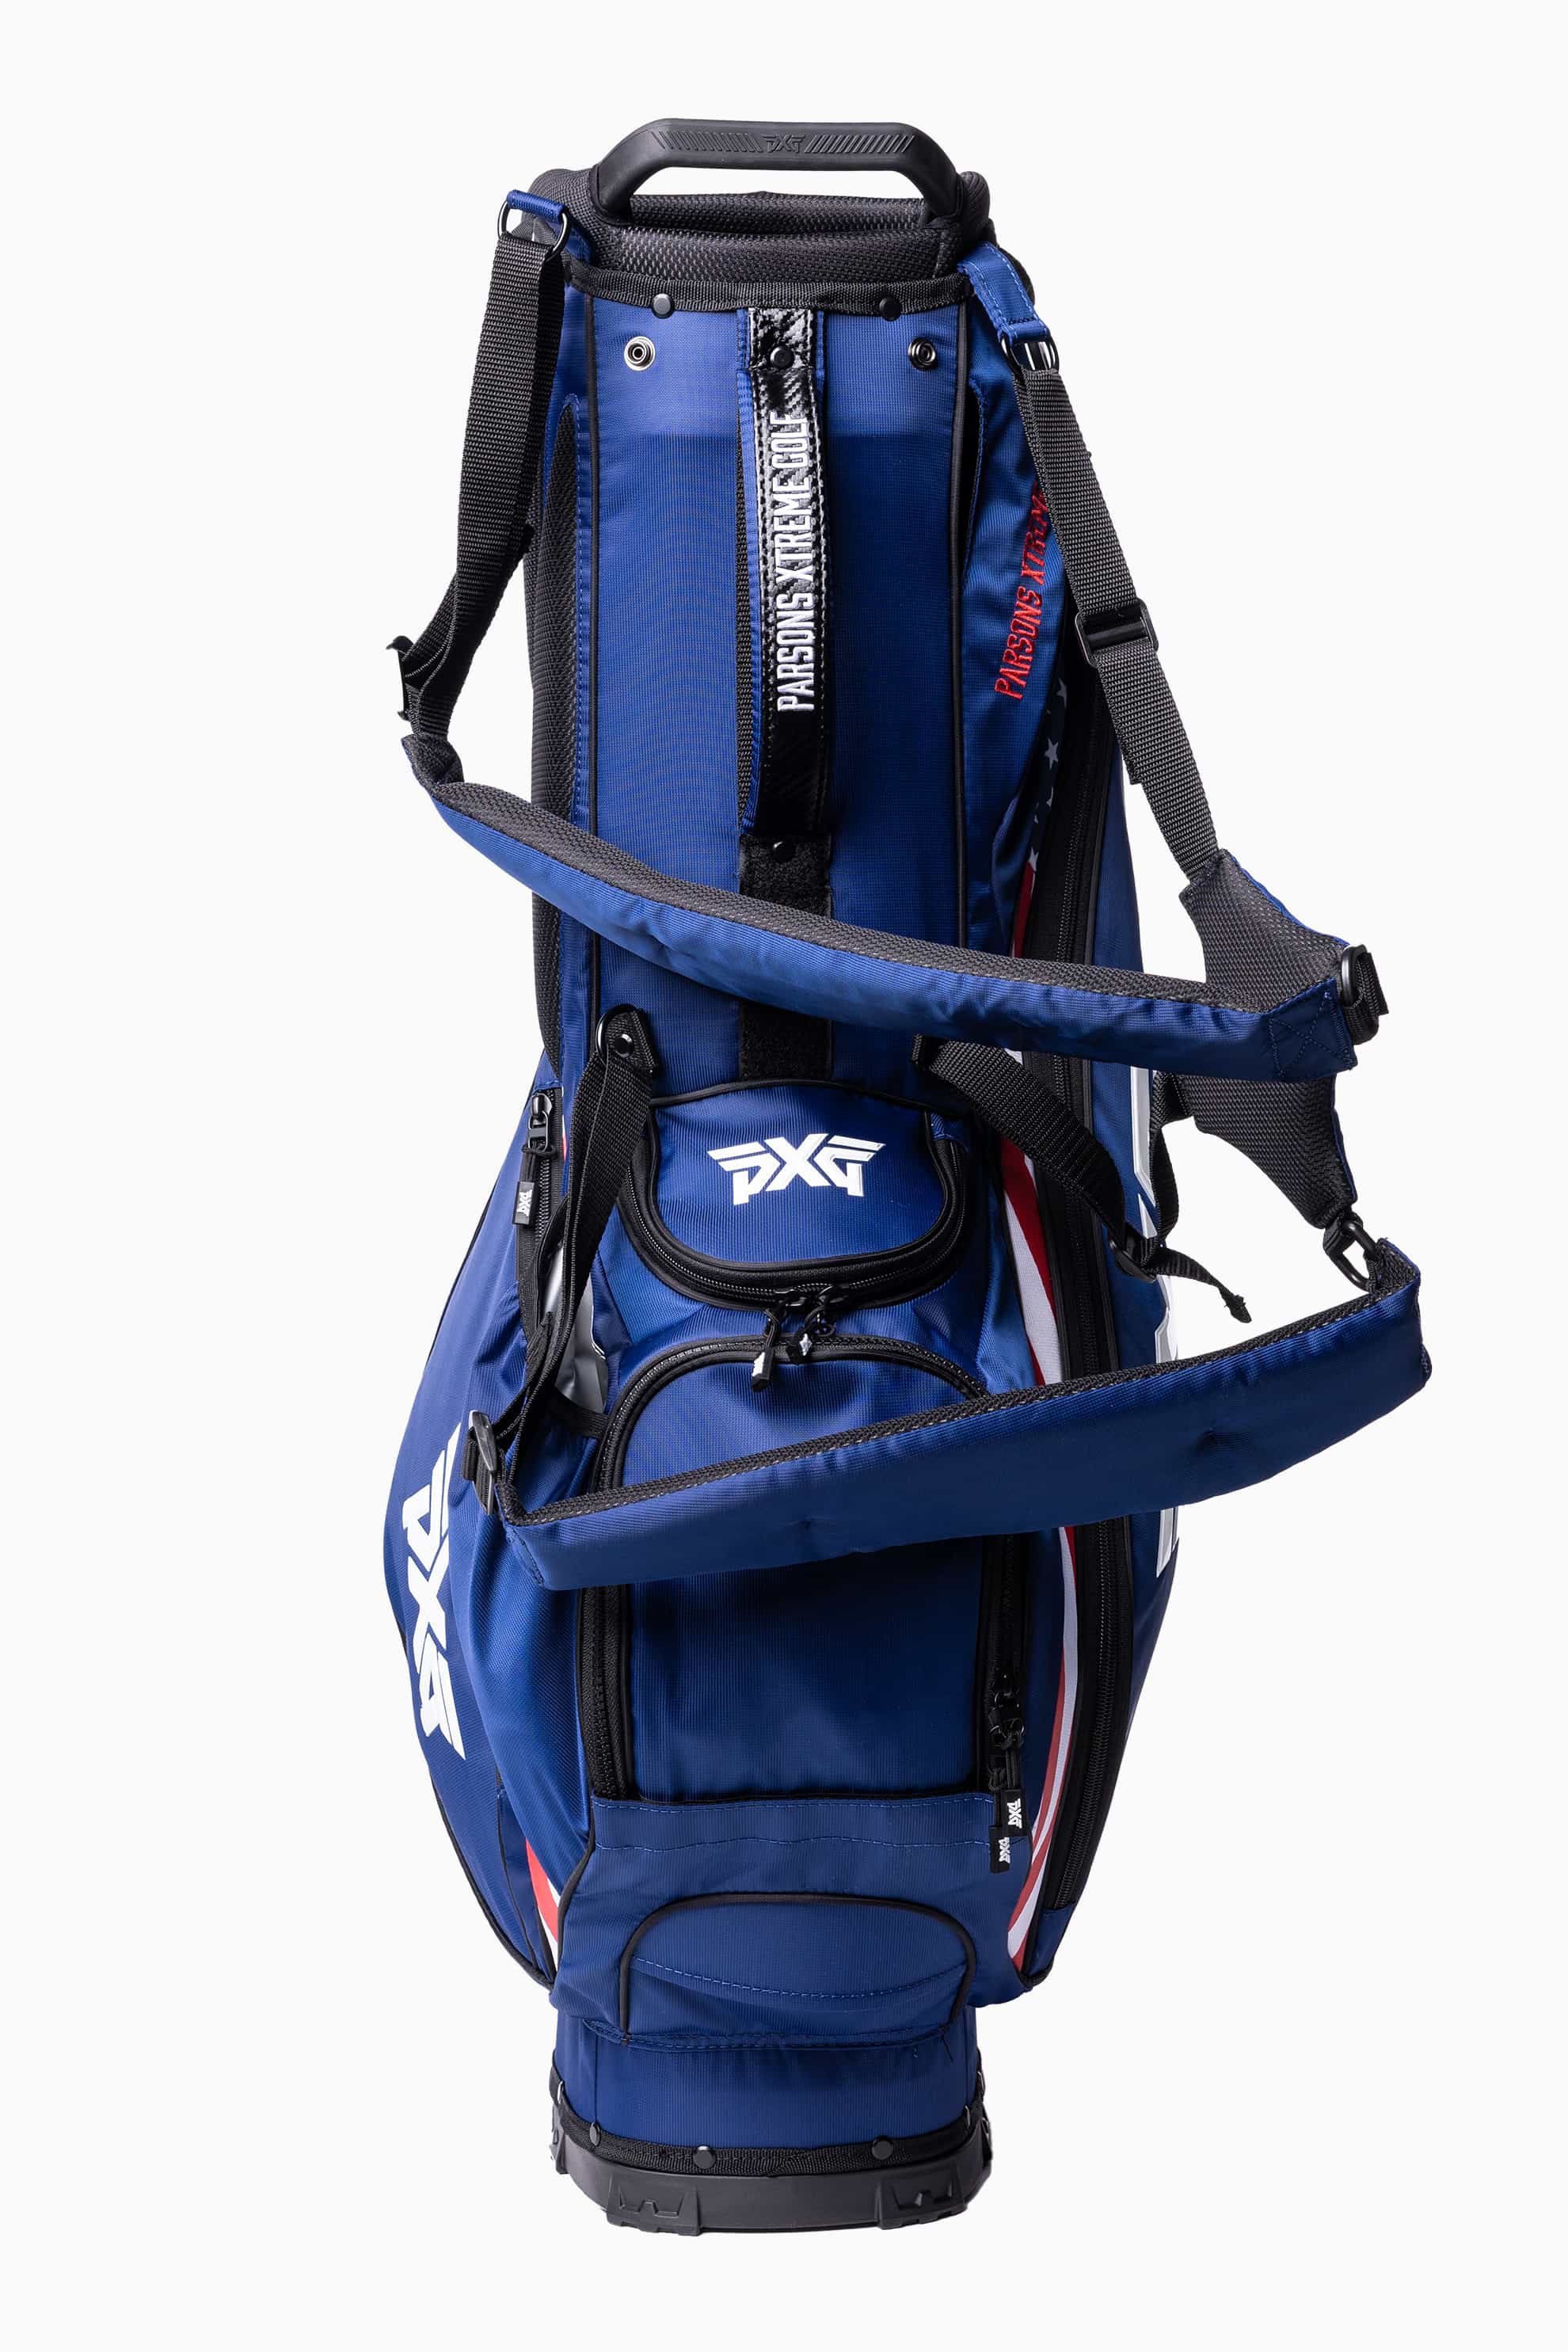 Buy Stars & Stripes Lightweight Carry Stand Bag | PXG